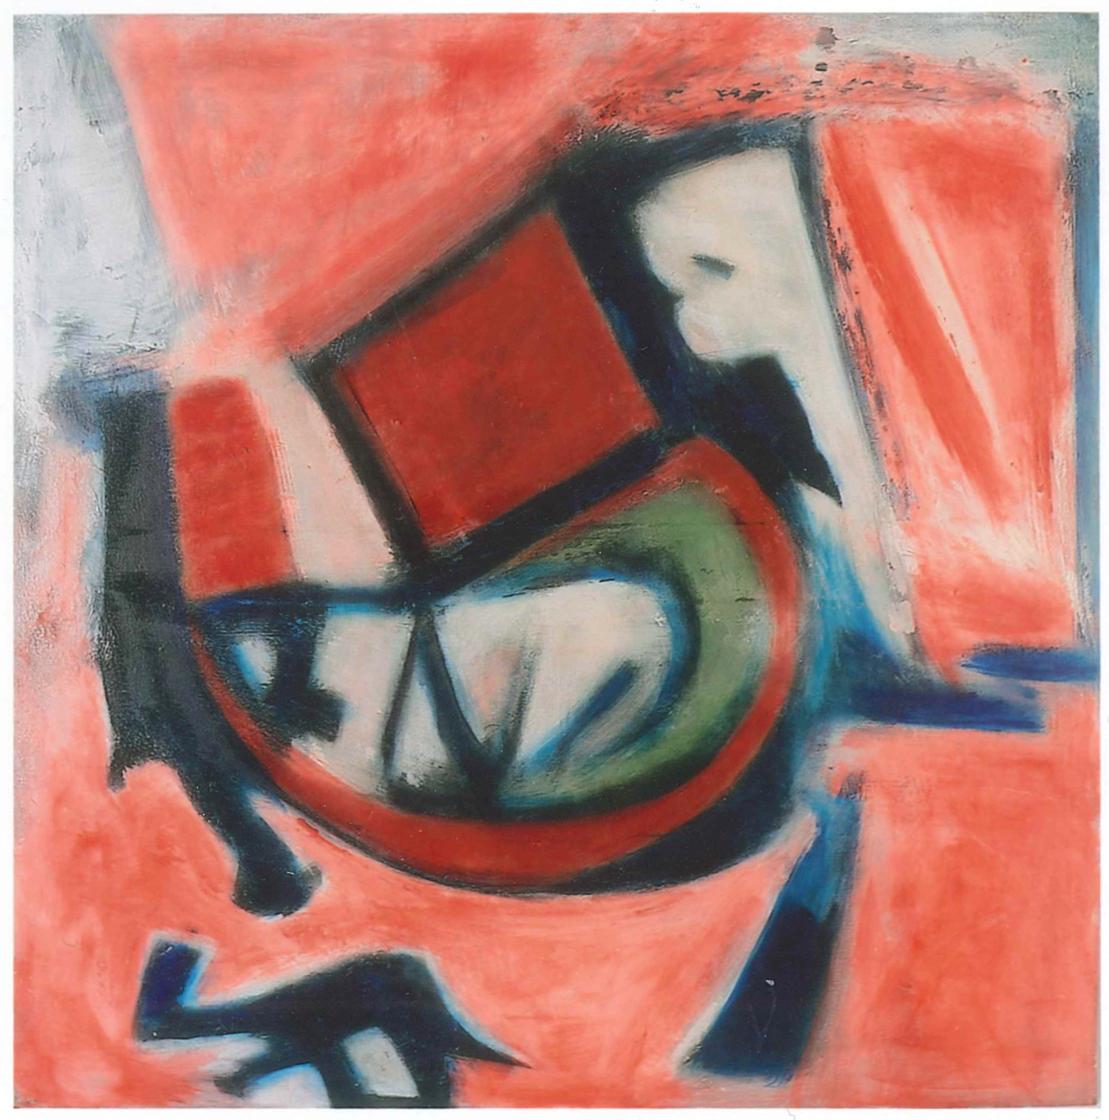 Abstract Expression is an original artwork realized by Giorgio Lo Fermo in 2010.

Oil on canvas.

This contemporary abstract composition was realized by the artist using a pleasant combination of colors: r

Giorgio Lo Fermo is an Italian painter and